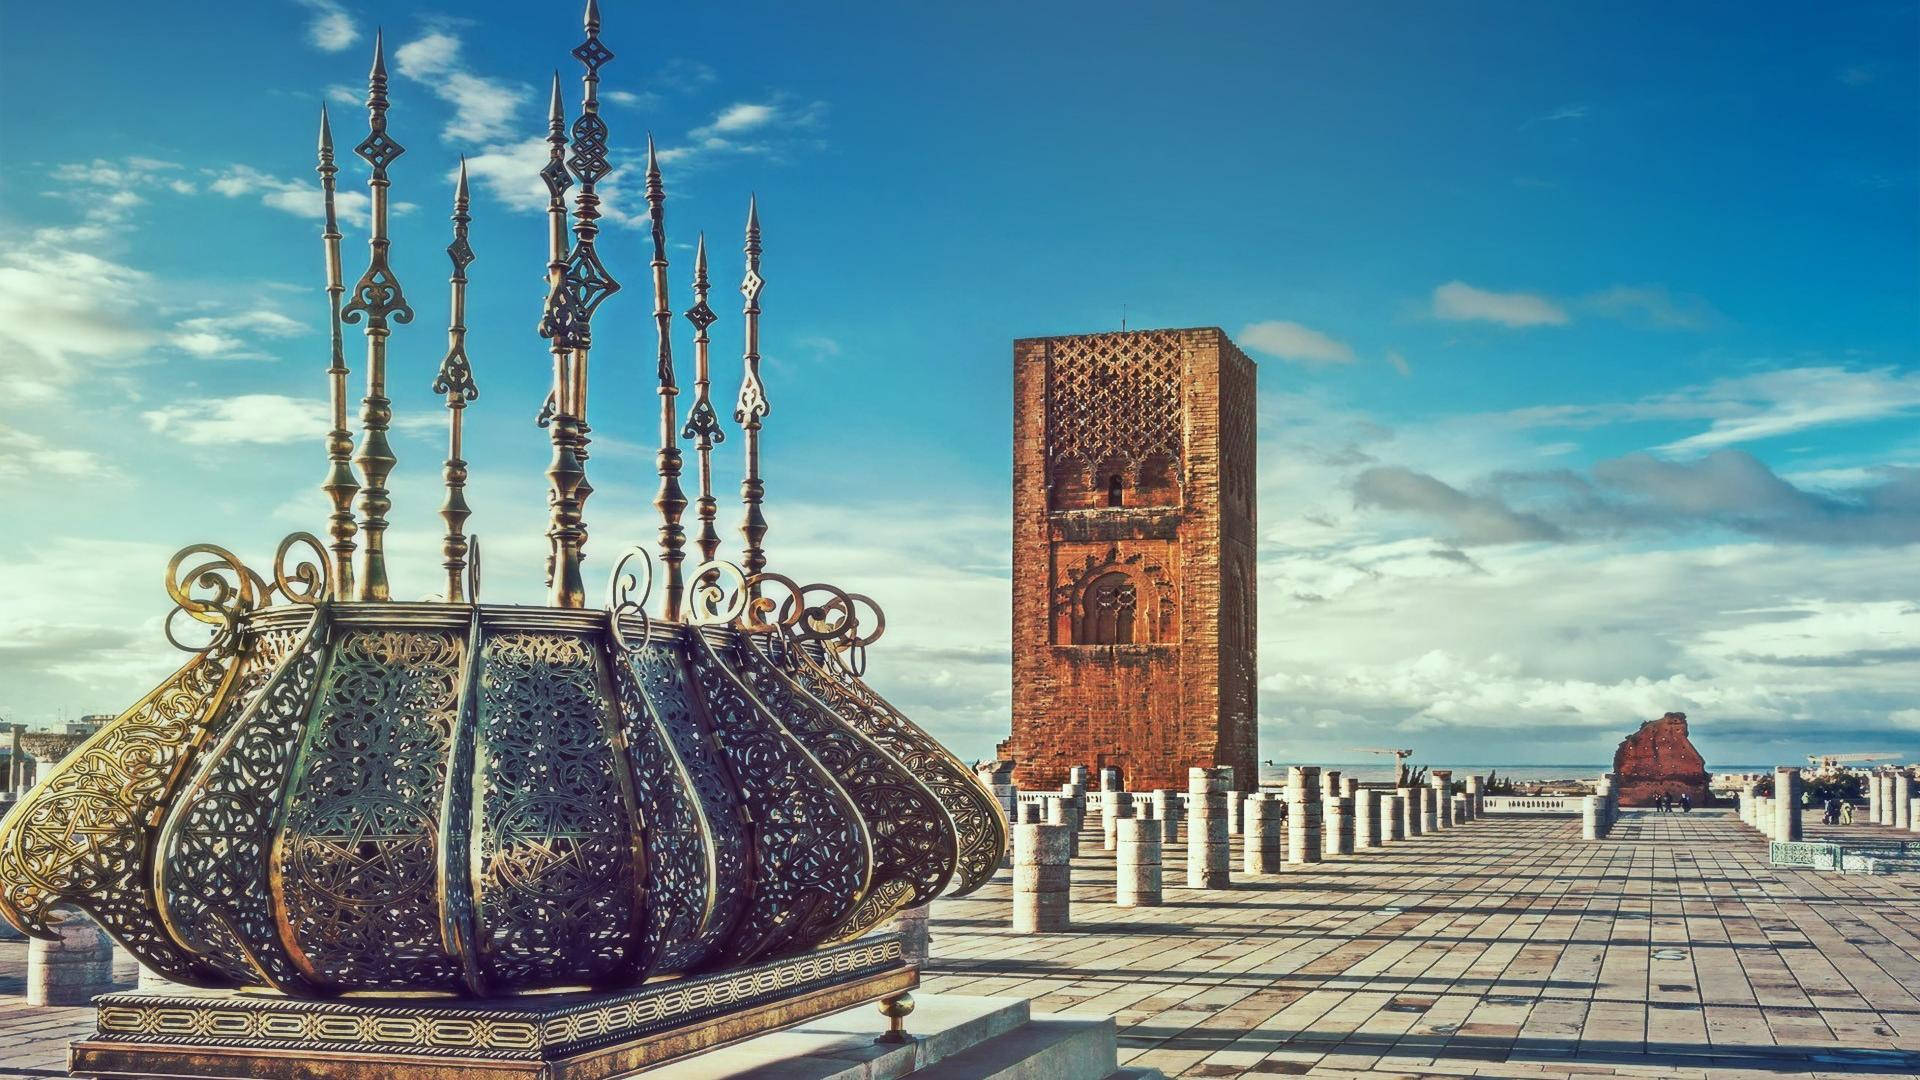 Hassan Tower In Morocco Background